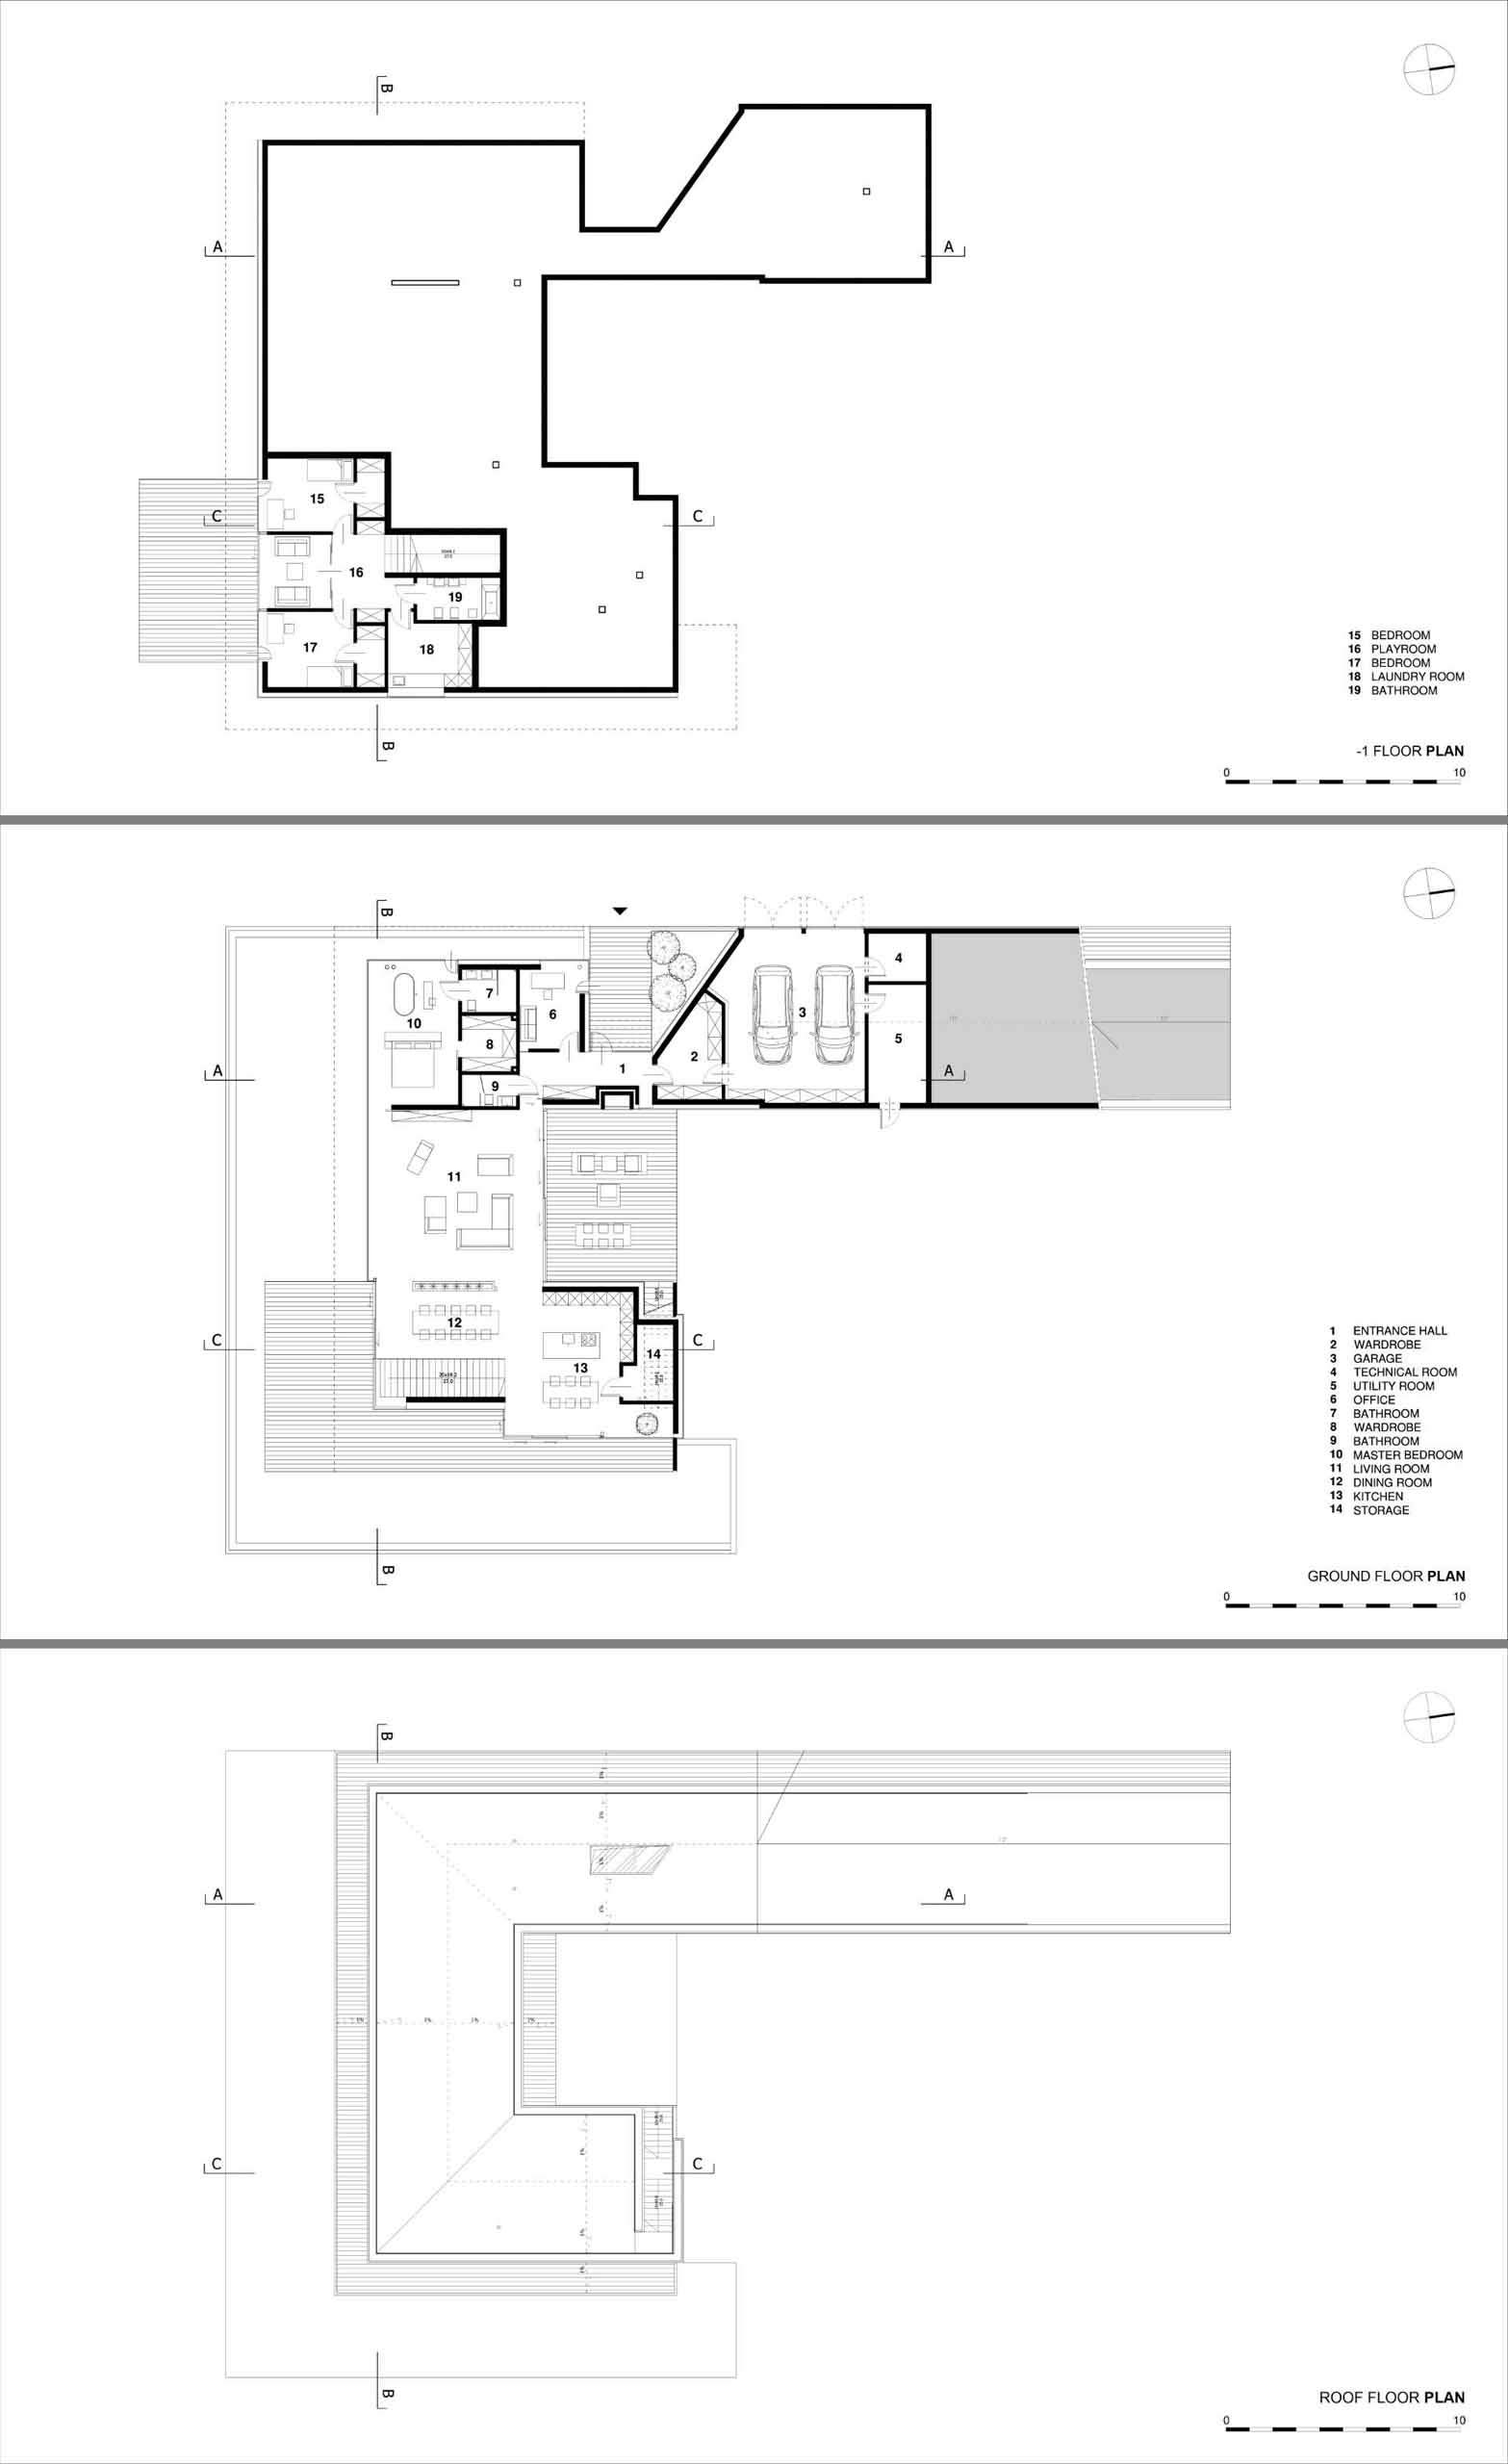 The floor plan of a modern multi-level home.